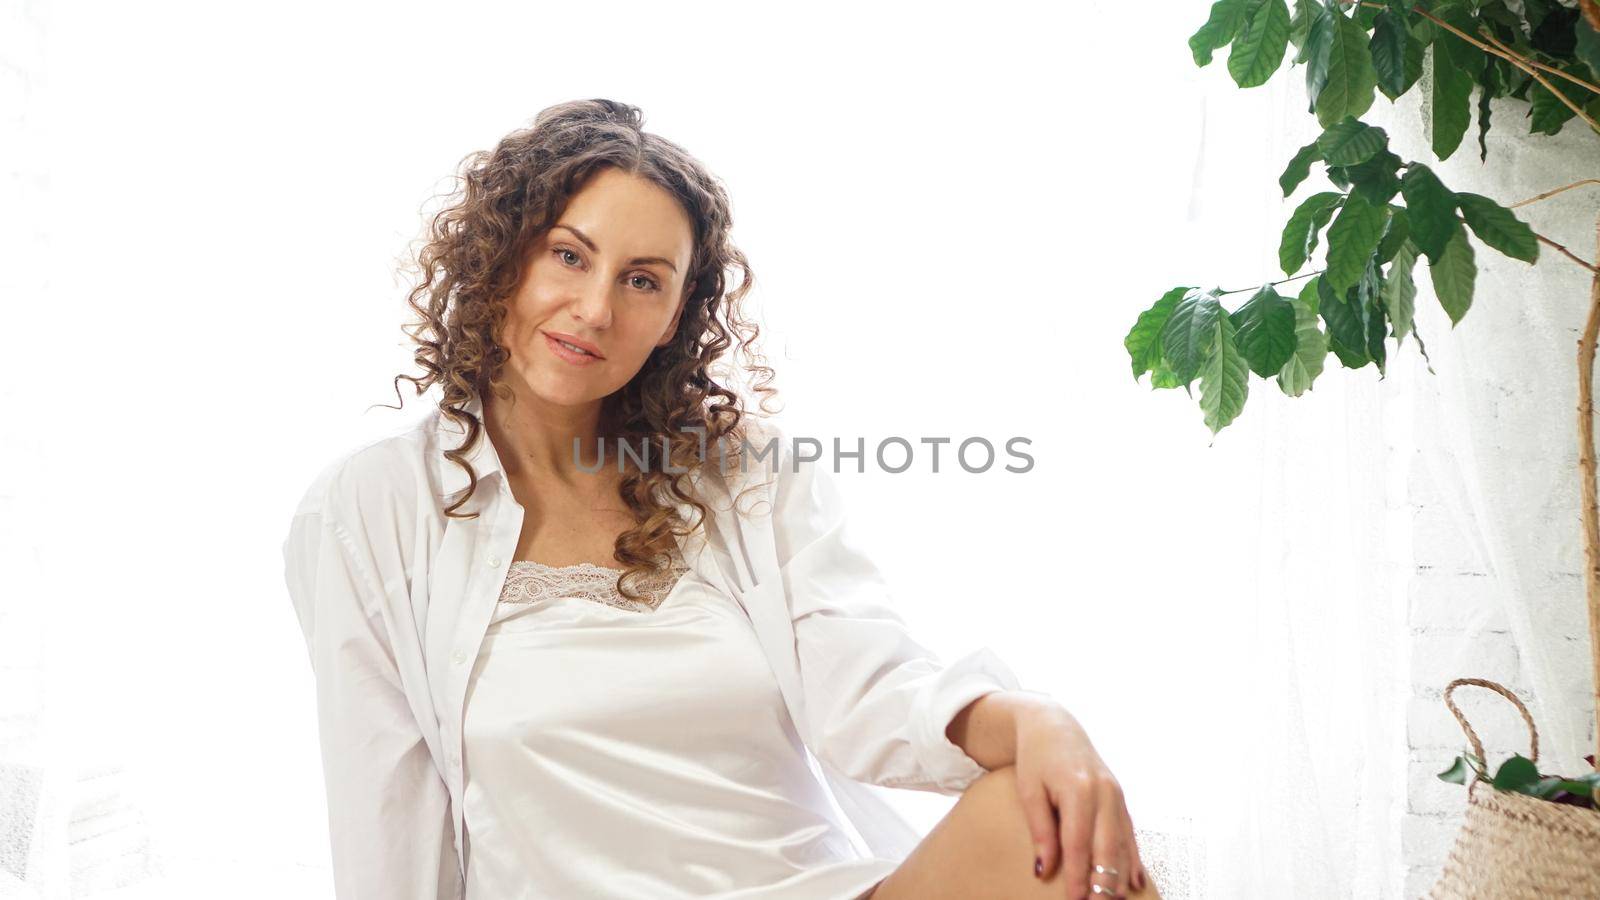 Portrait of a beautiful woman sitting at home with plants and smiling at camera. Happy morning - sunny day